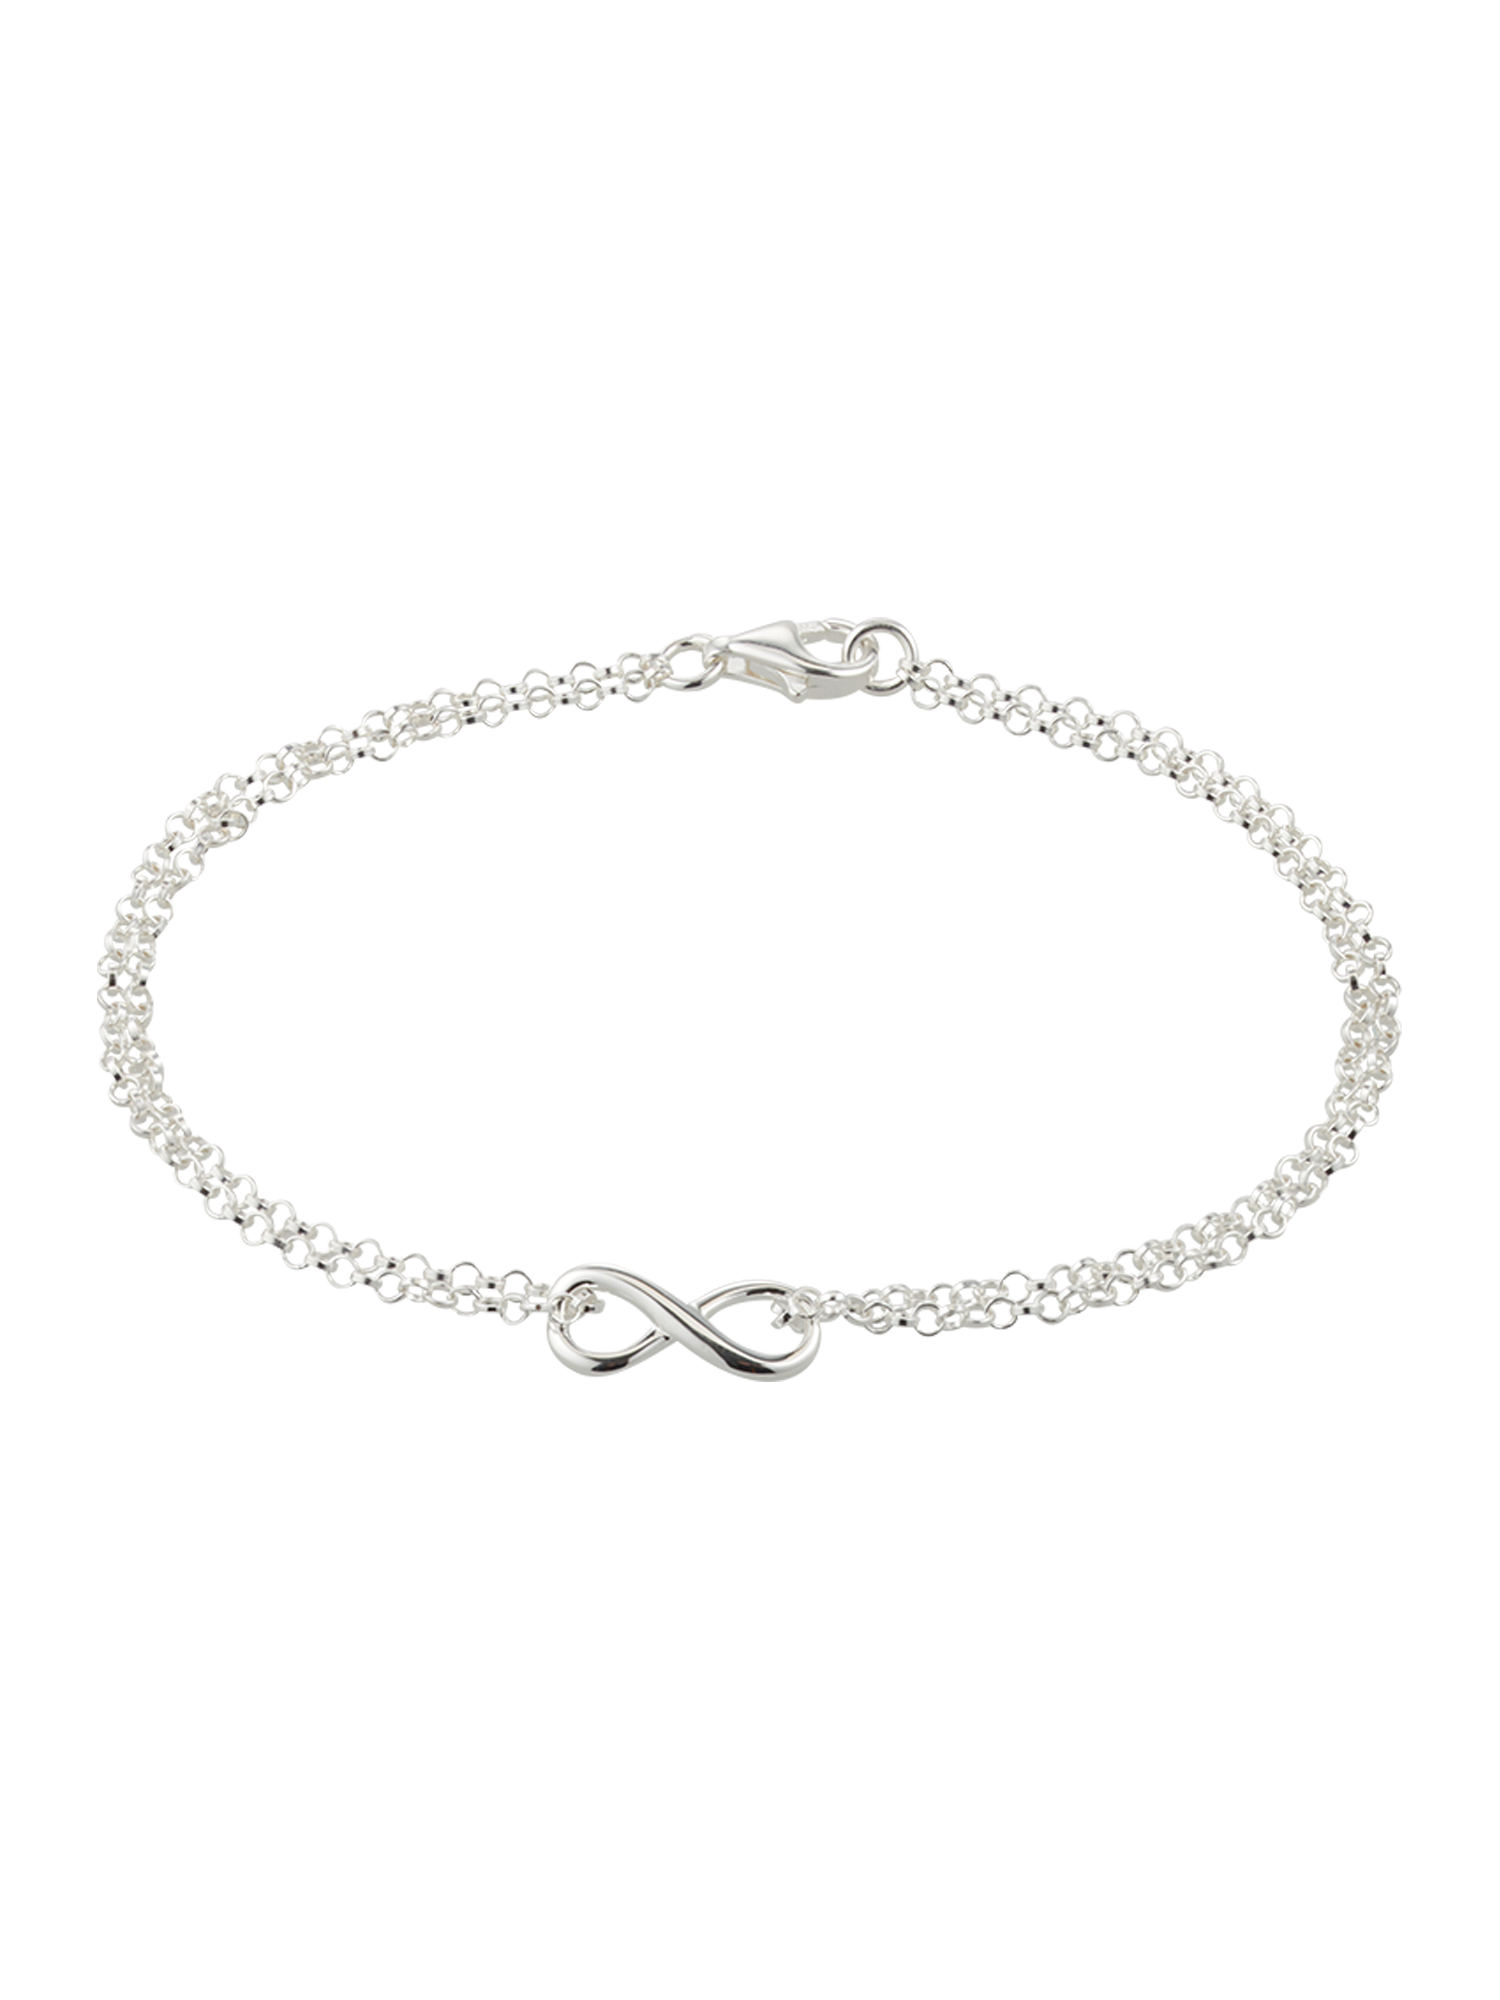 ELLI Armband Infinity in Silber 